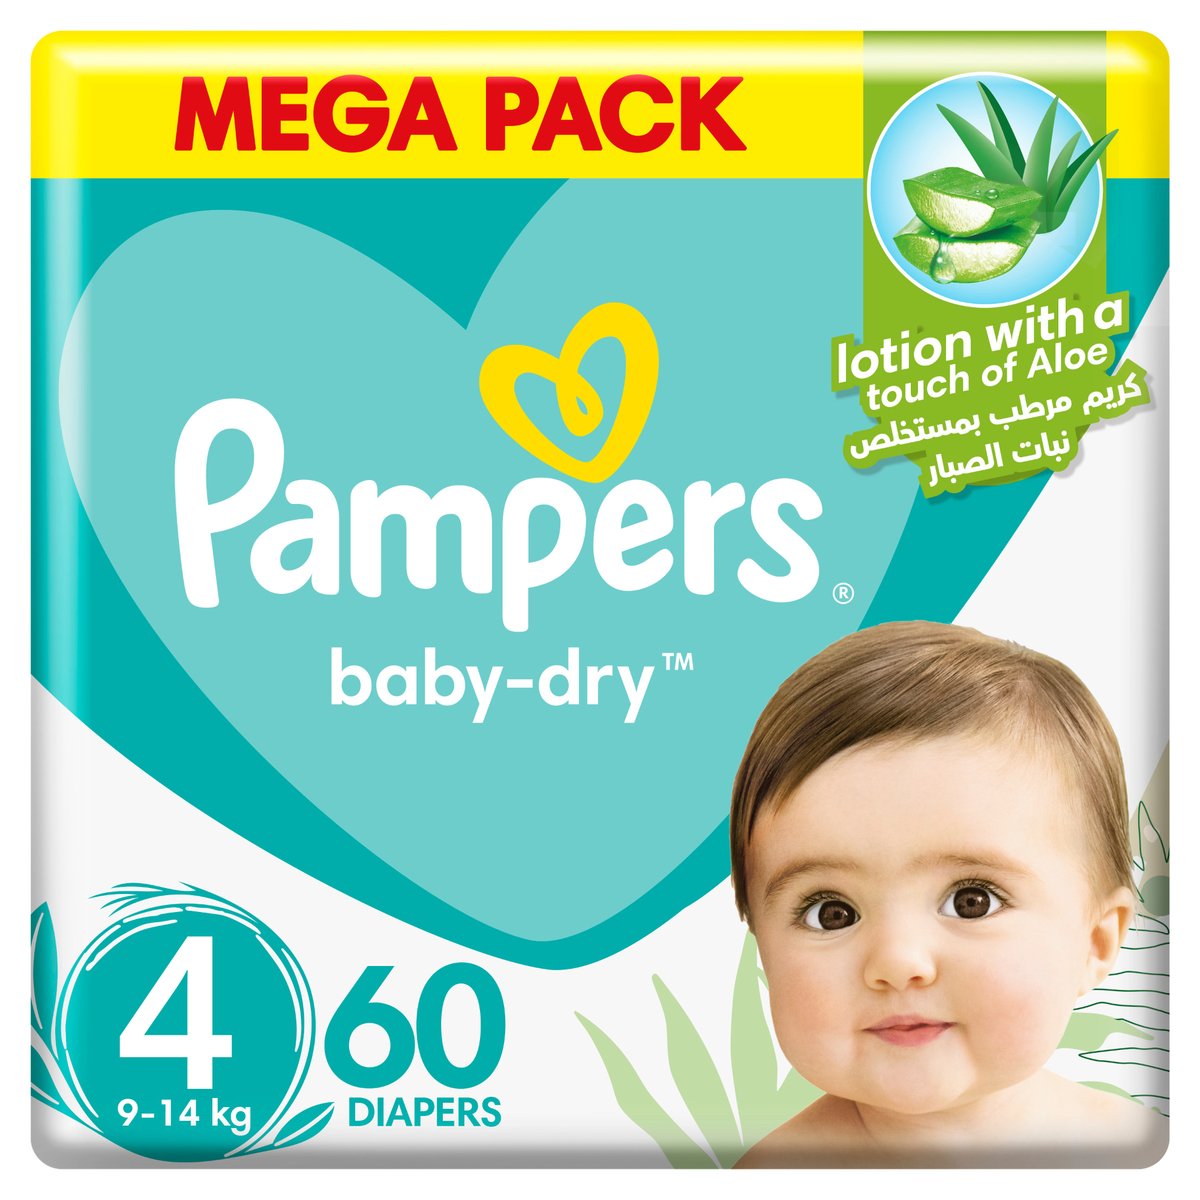 Buy Pampers Baby-Dry Taped Diapers with Aloe Vera Lotion, up to 100% Leakage Protection, Size 4, 9-14kg, 60 pcs Online at Best Price | Baby Nappies | Lulu Kuwait in Kuwait